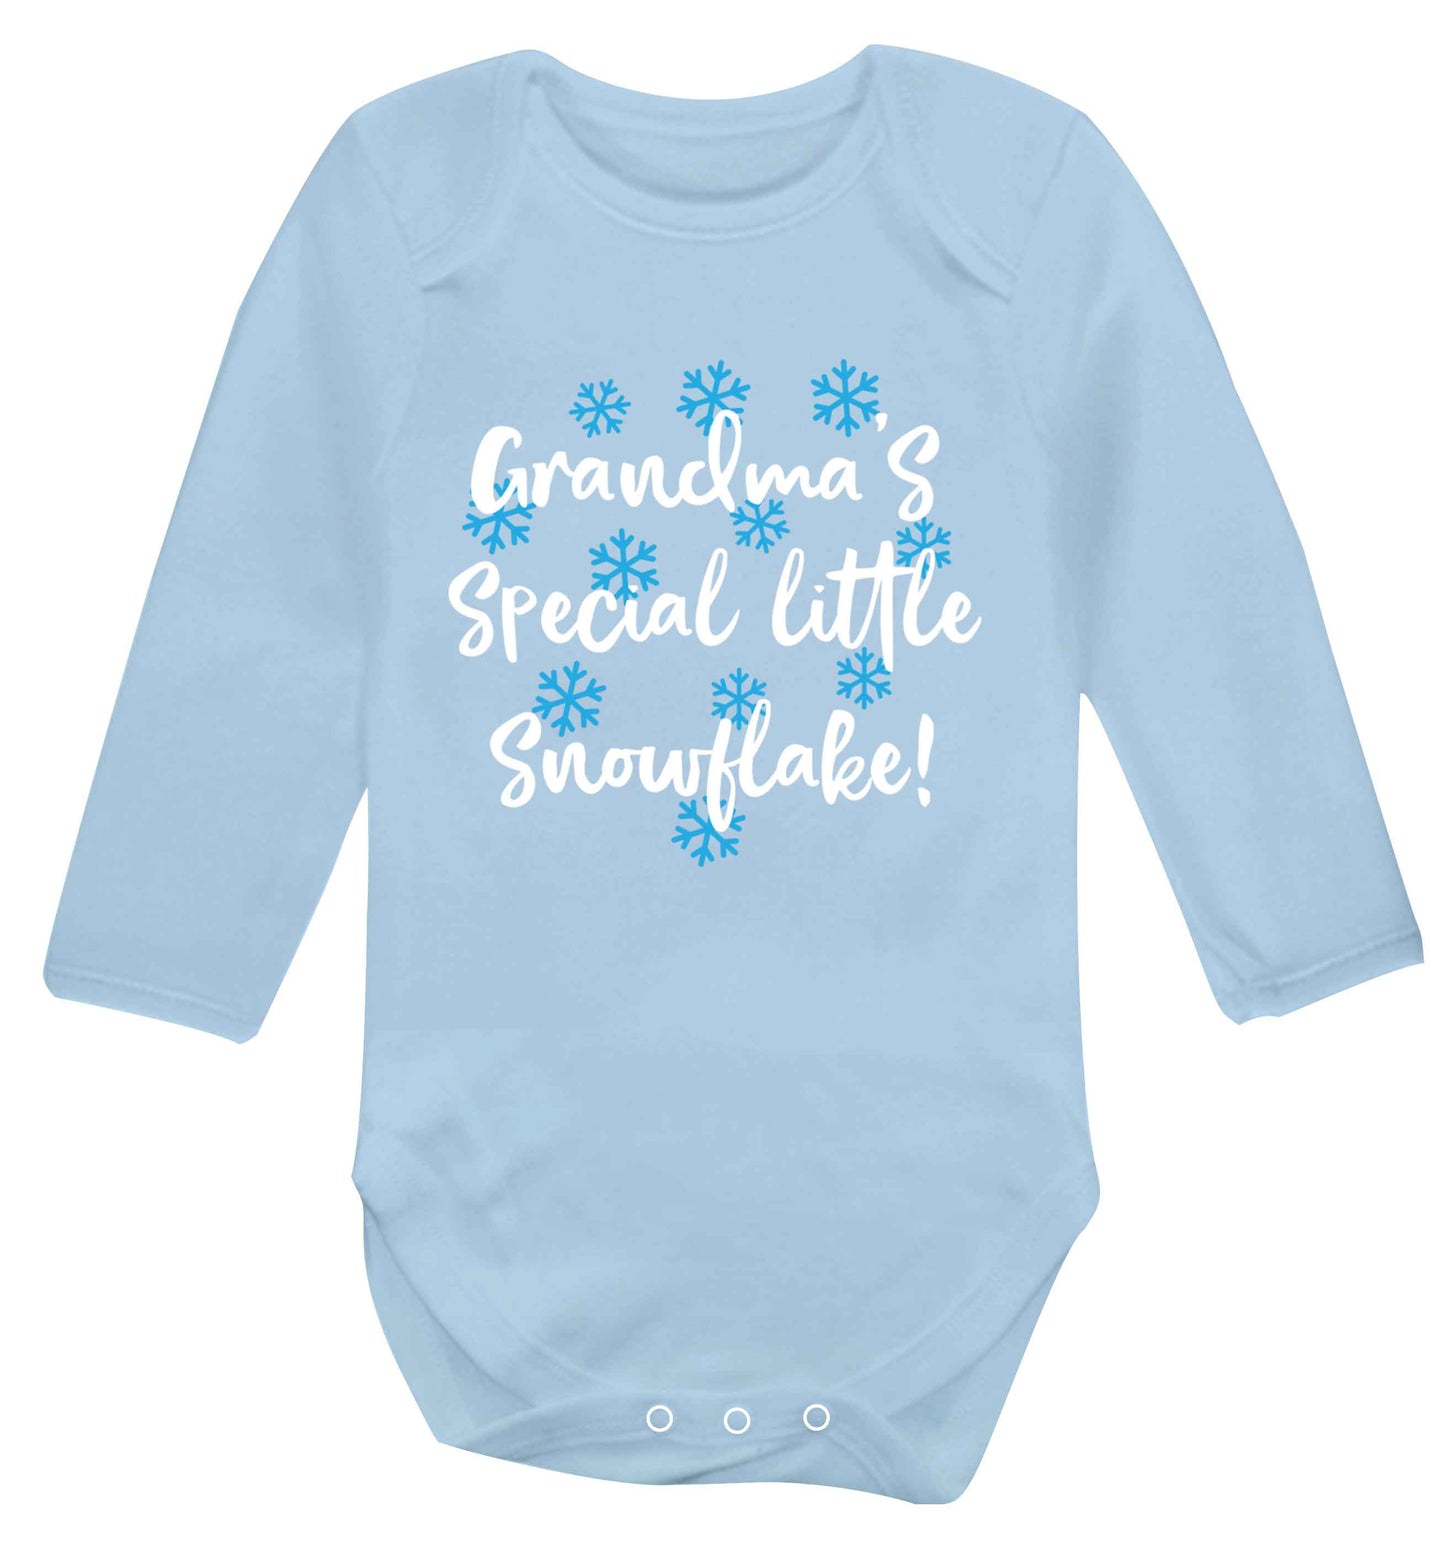 Grandma's special little snowflake Baby Vest long sleeved pale blue 6-12 months